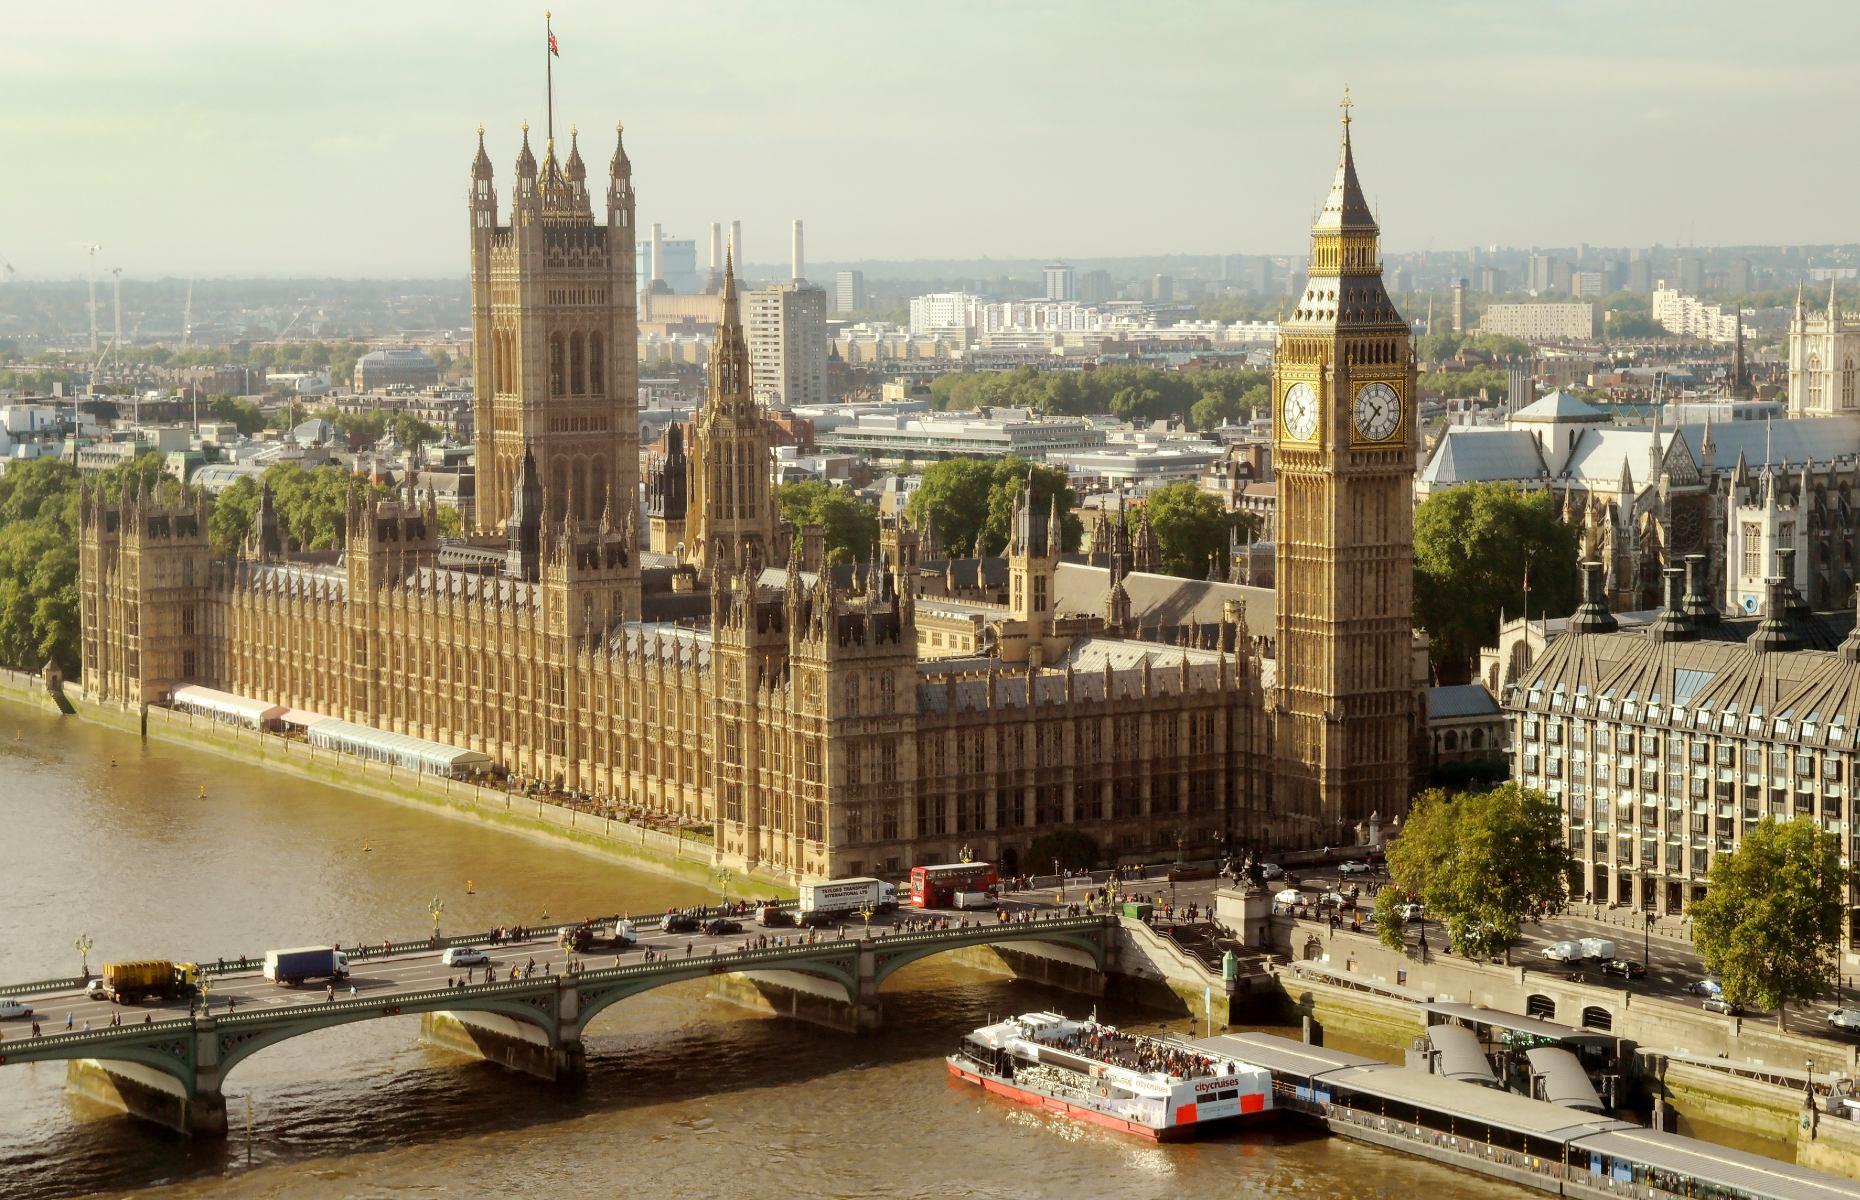 <p>On the banks of the River Thames, the <a href="https://www.parliament.uk/about/living-heritage/building/palace/">Palace of Westminster</a>’s location has been a place for kingship, politics and power since at least the Middle Ages. Originally built in 1016 as a palace by the Danish king Canute the Great, it has been the site for numerous notable events including the trial of Sir Thomas Moore and the infamous Gunpowder Plot. The present building was designed by Sir Charles Barry in the 19th century after the previous structure was destroyed in the 1834 fire, and its striking Victorian Gothic façade has become one of the most recognisable in the world.</p>